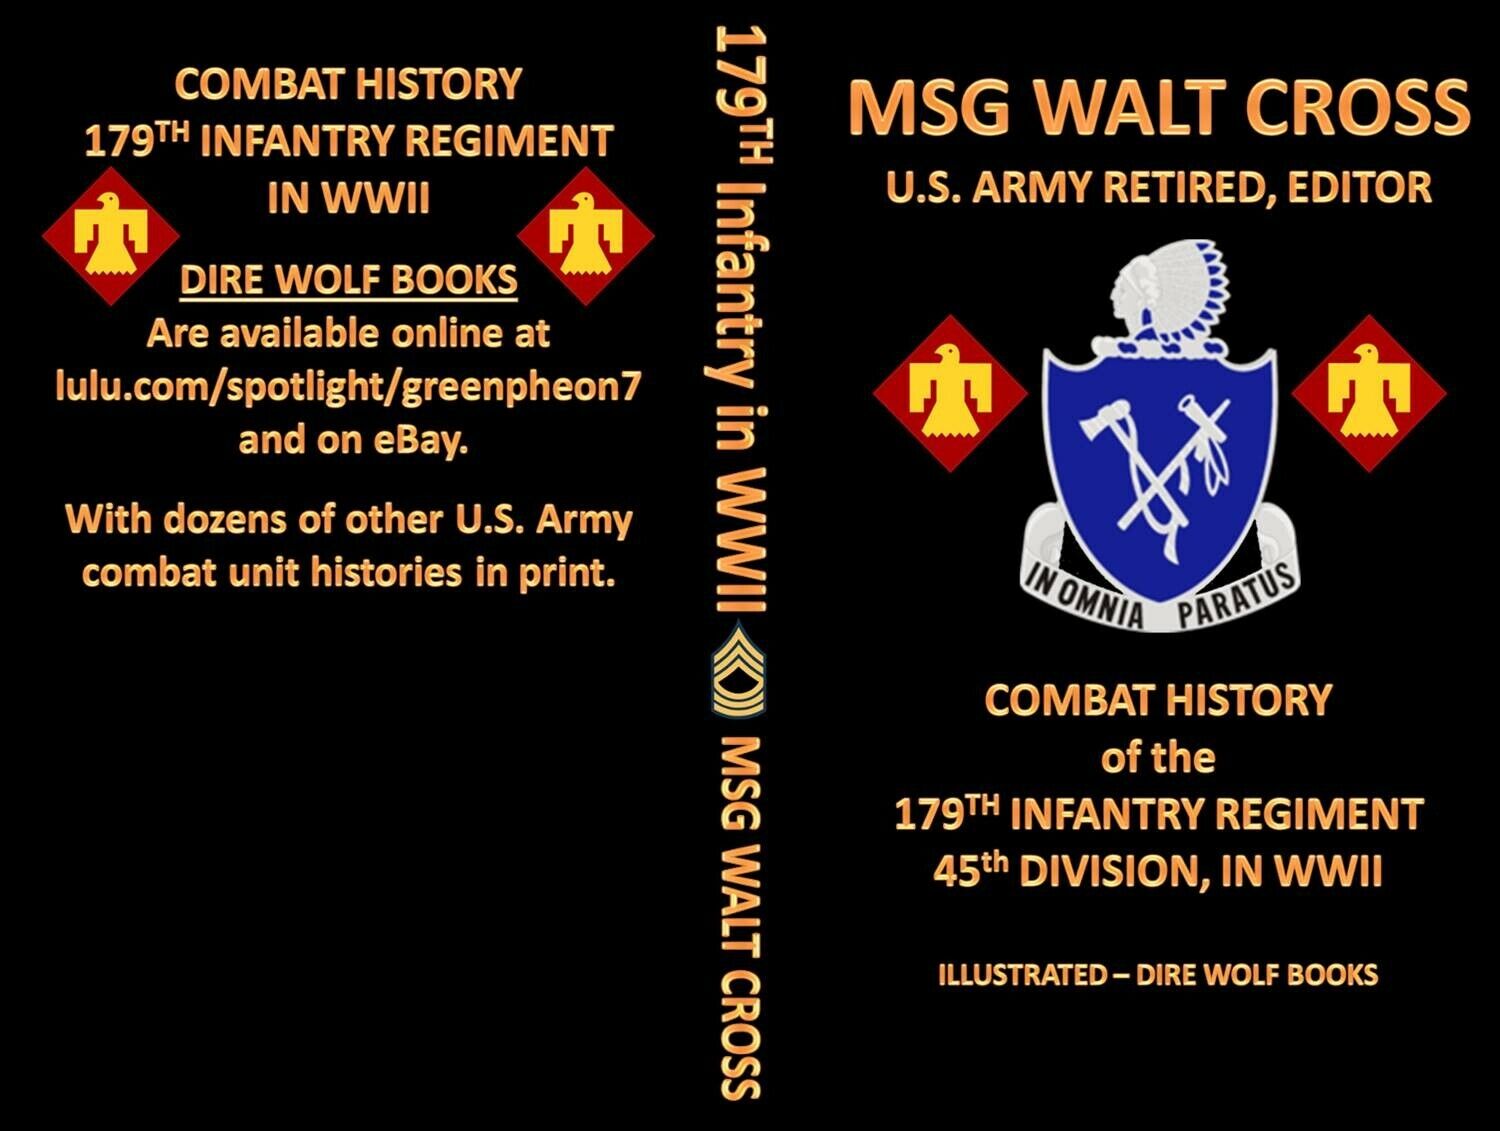 Combat History of the 179th Infantry Regiment, 45th Division in WWII